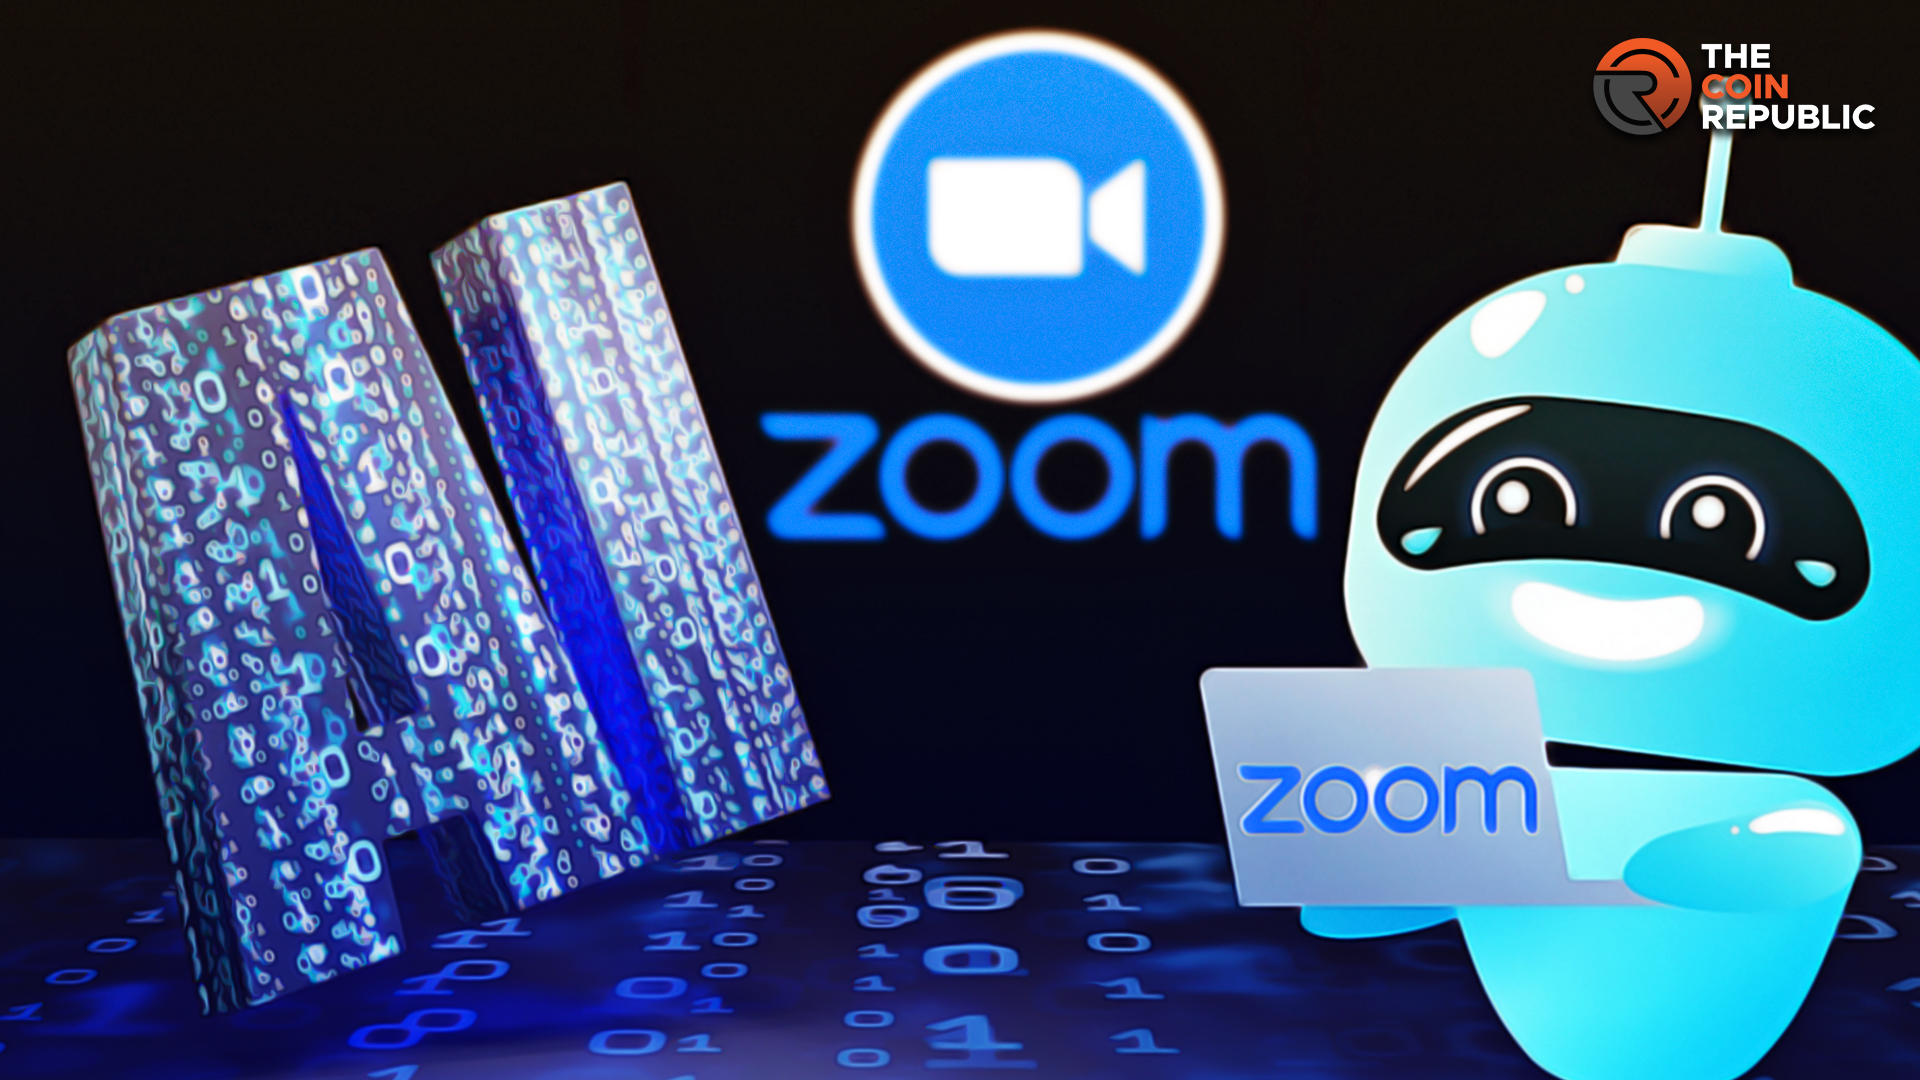 Zoom Declared to Use Data to Train AI with Full Customer Consent 